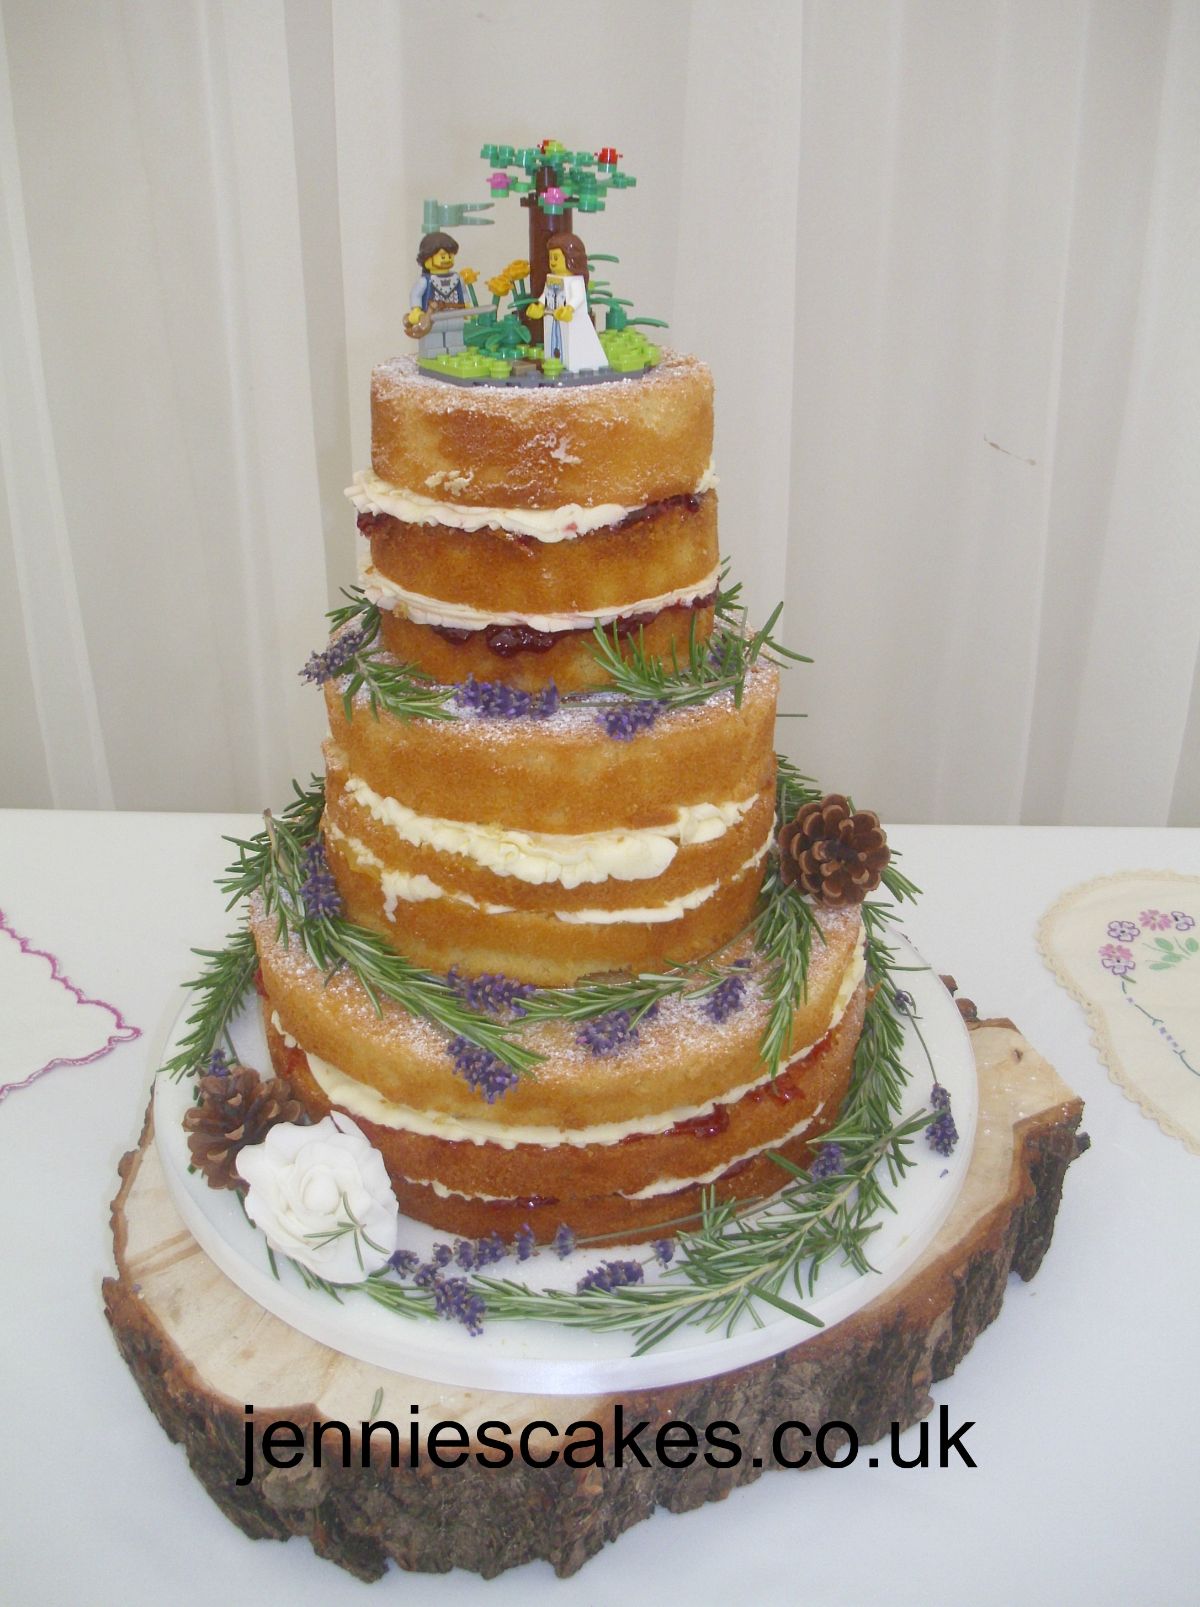 Jennie's cake's and catering-Image-89